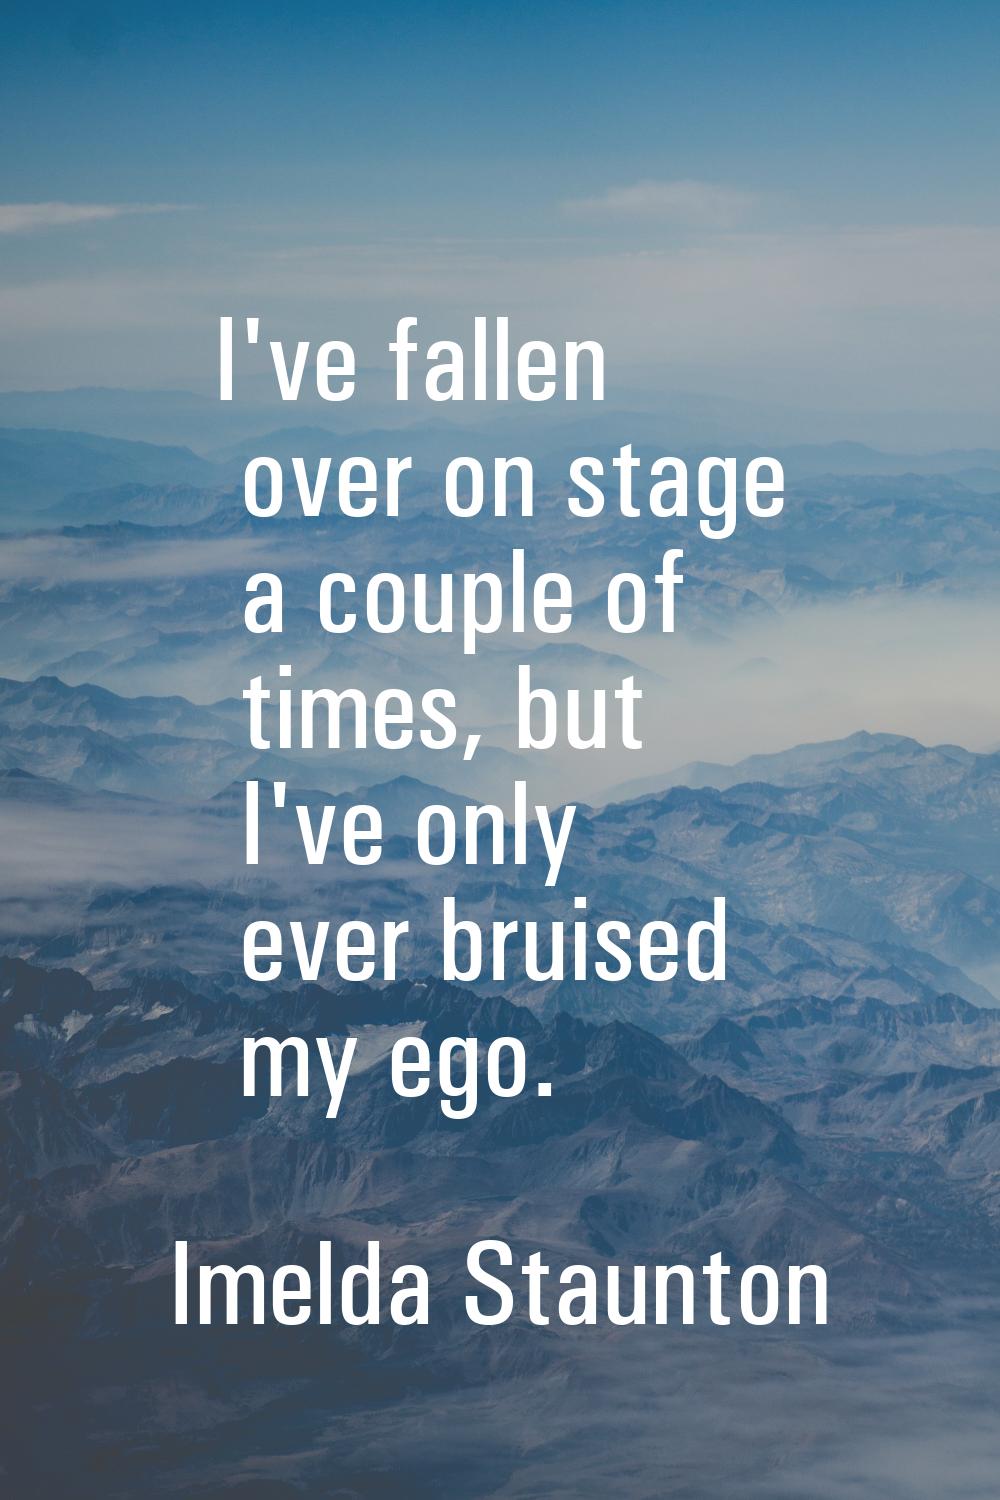 I've fallen over on stage a couple of times, but I've only ever bruised my ego.